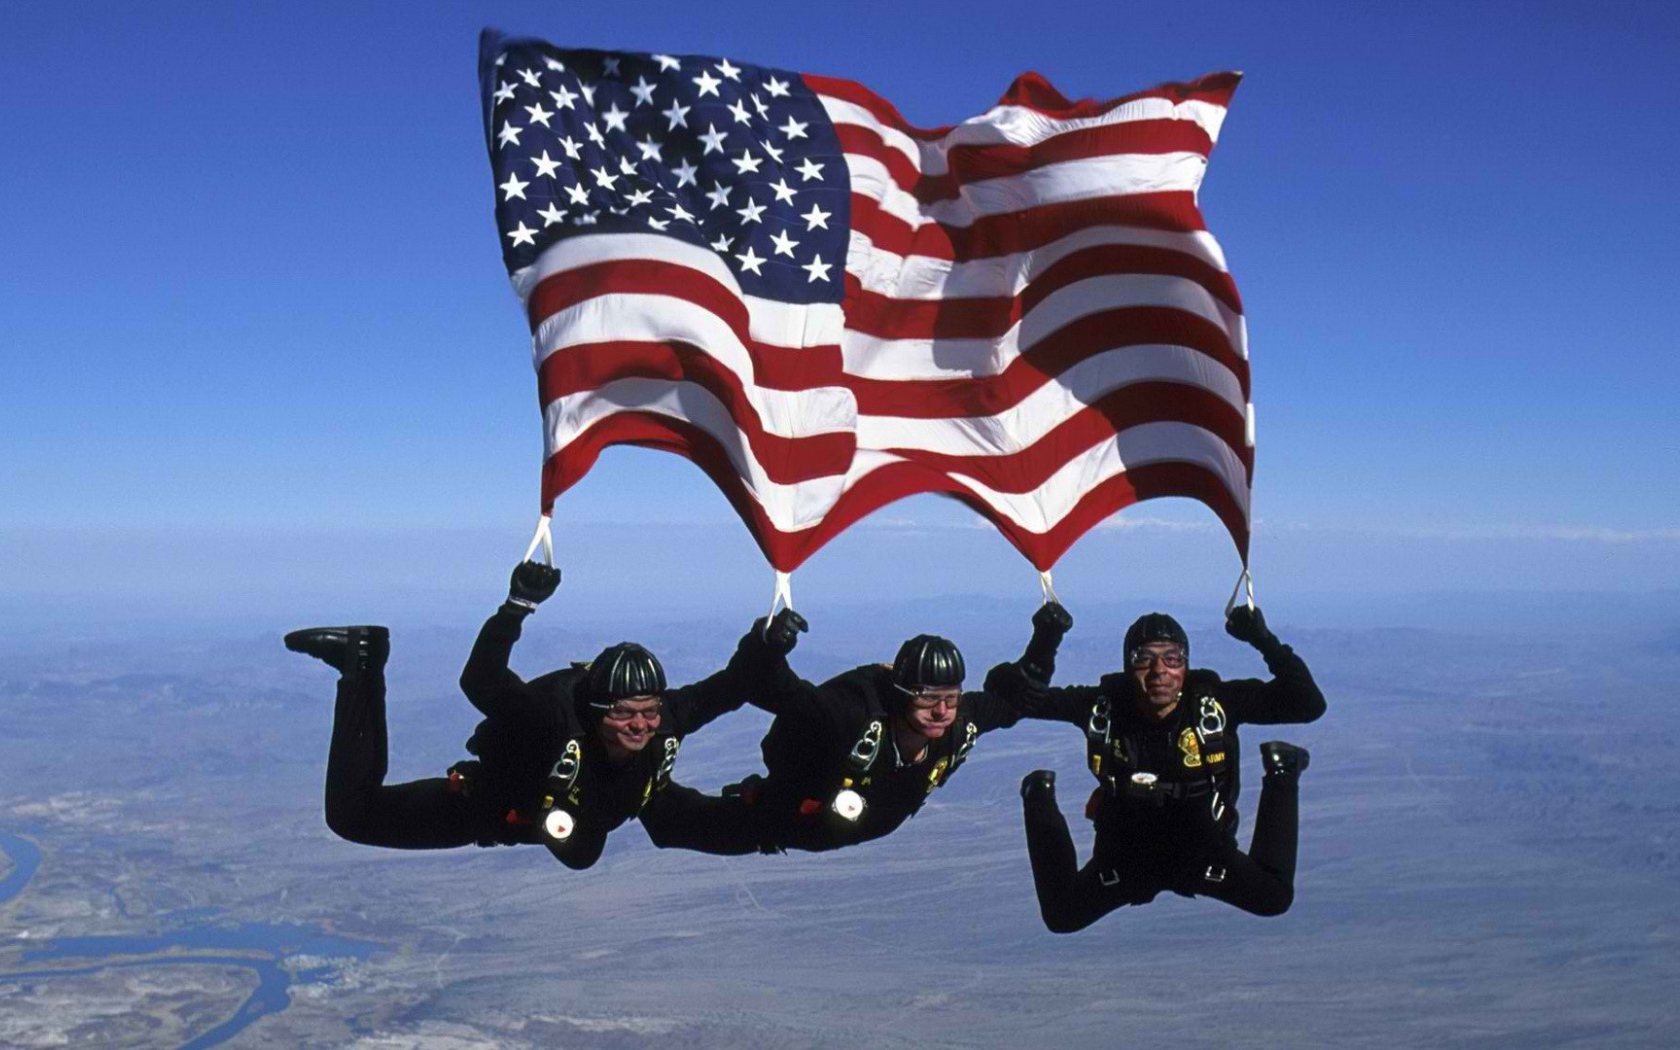 Paratroopers with the American flag